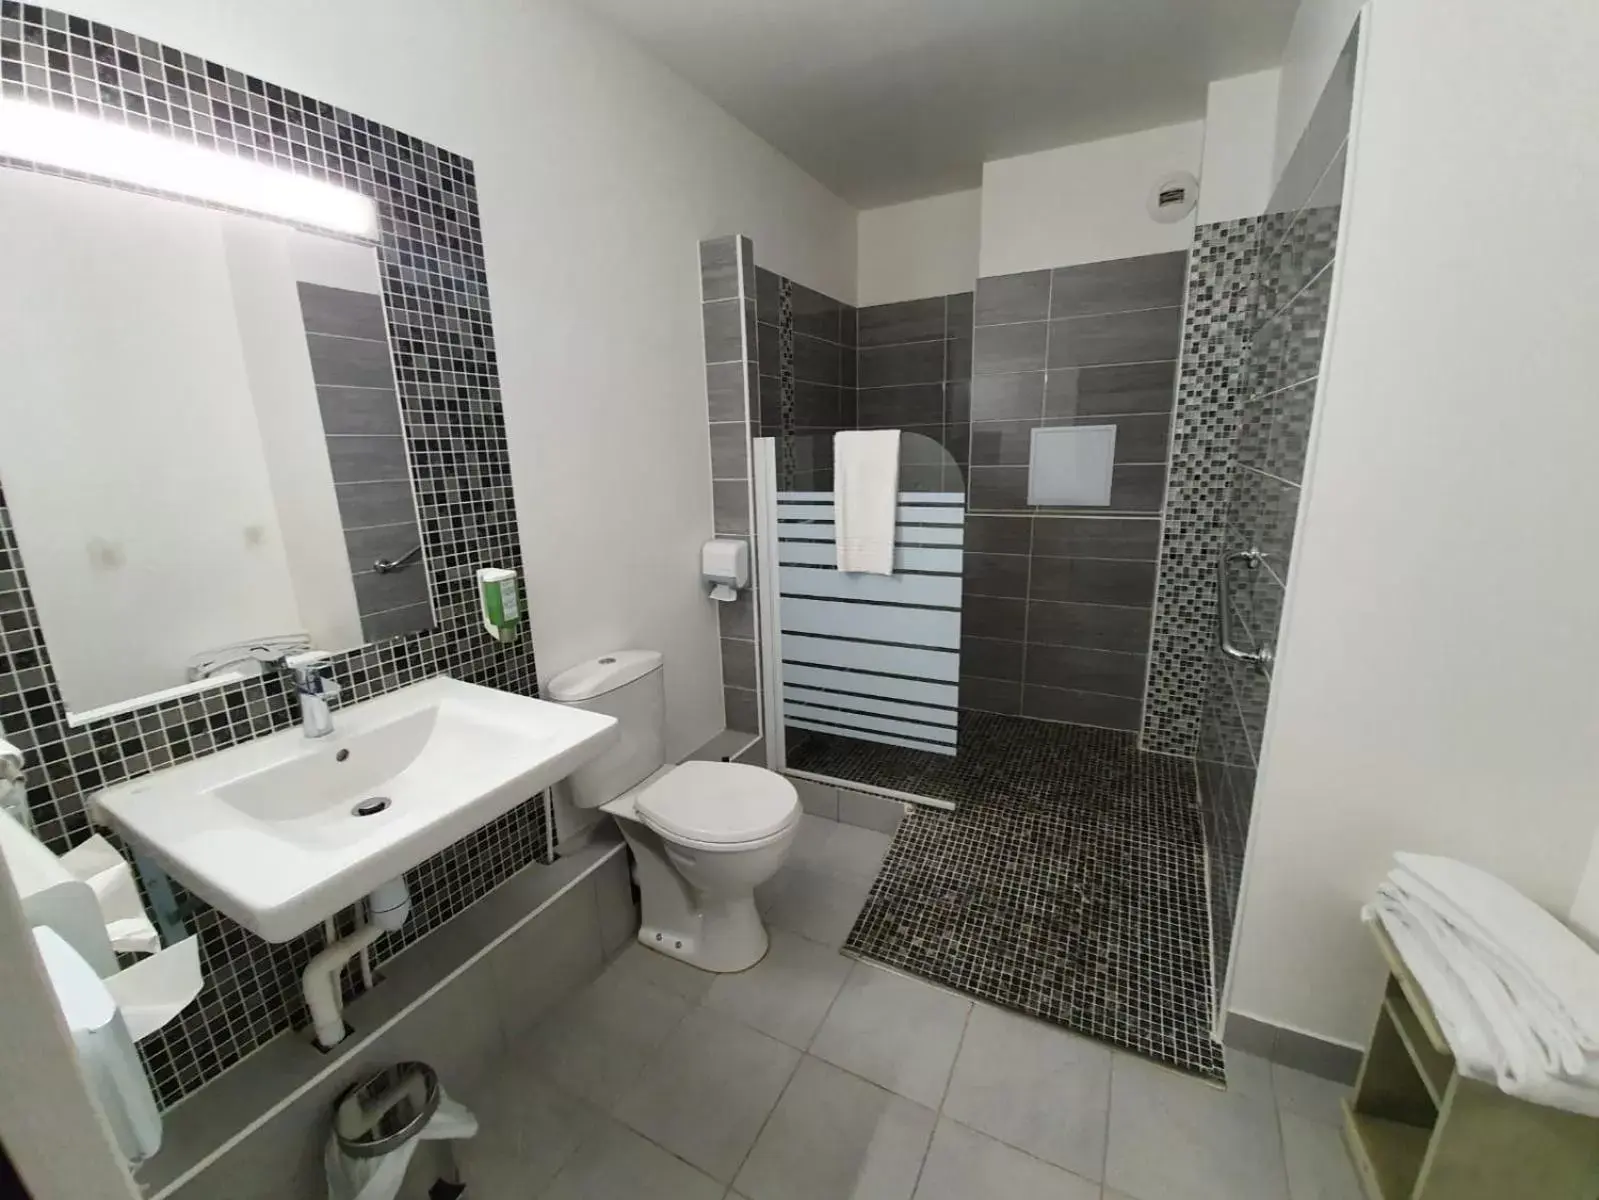 Facility for disabled guests, Bathroom in Kyriad Saint Fargeau Ponthierry - Apollonia